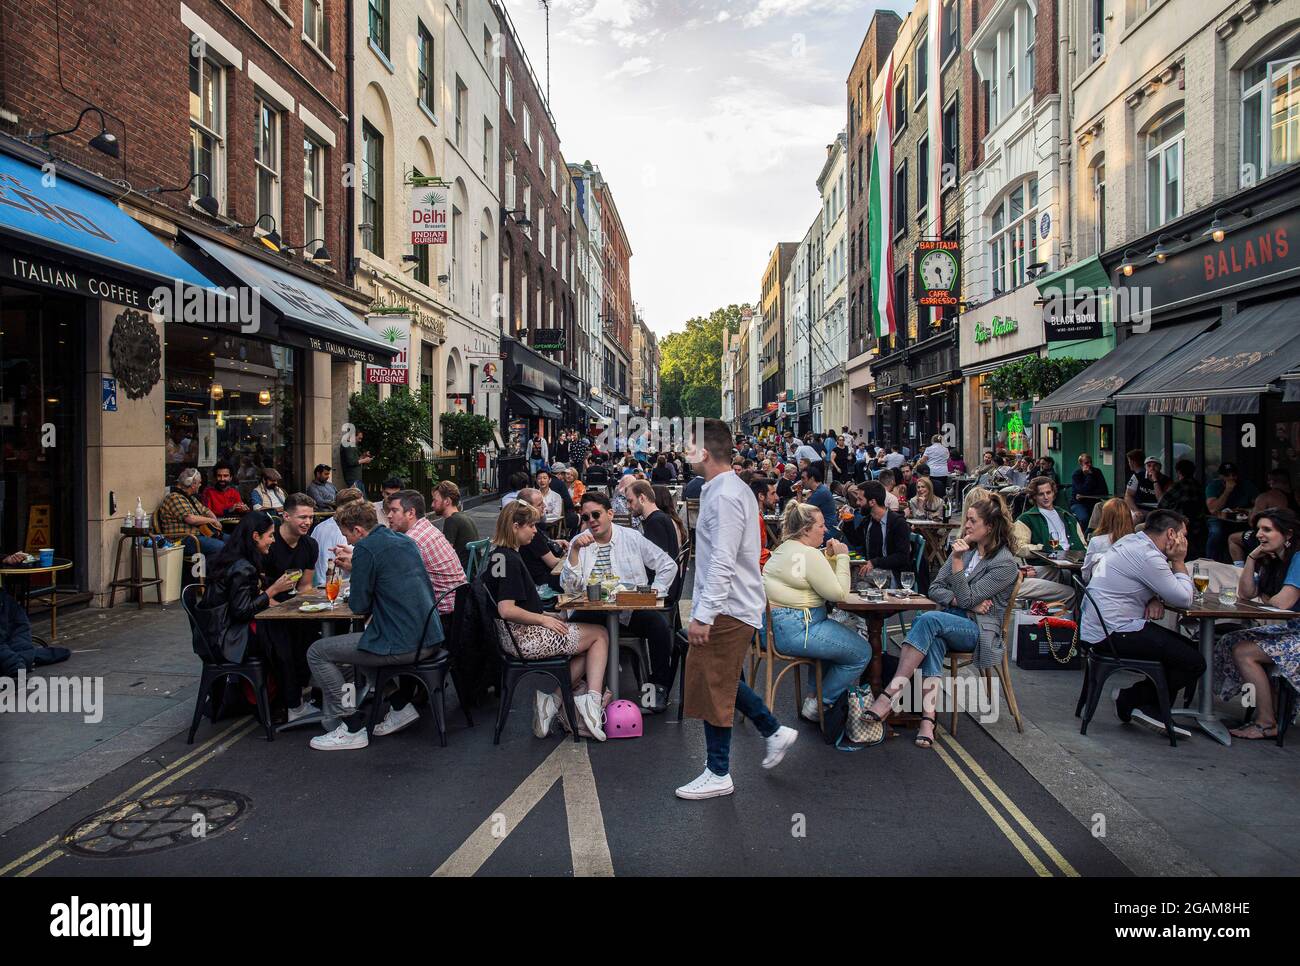 People eating on restaurant tables placed outside on Frith Street in Soho, London, UK Stock Photo